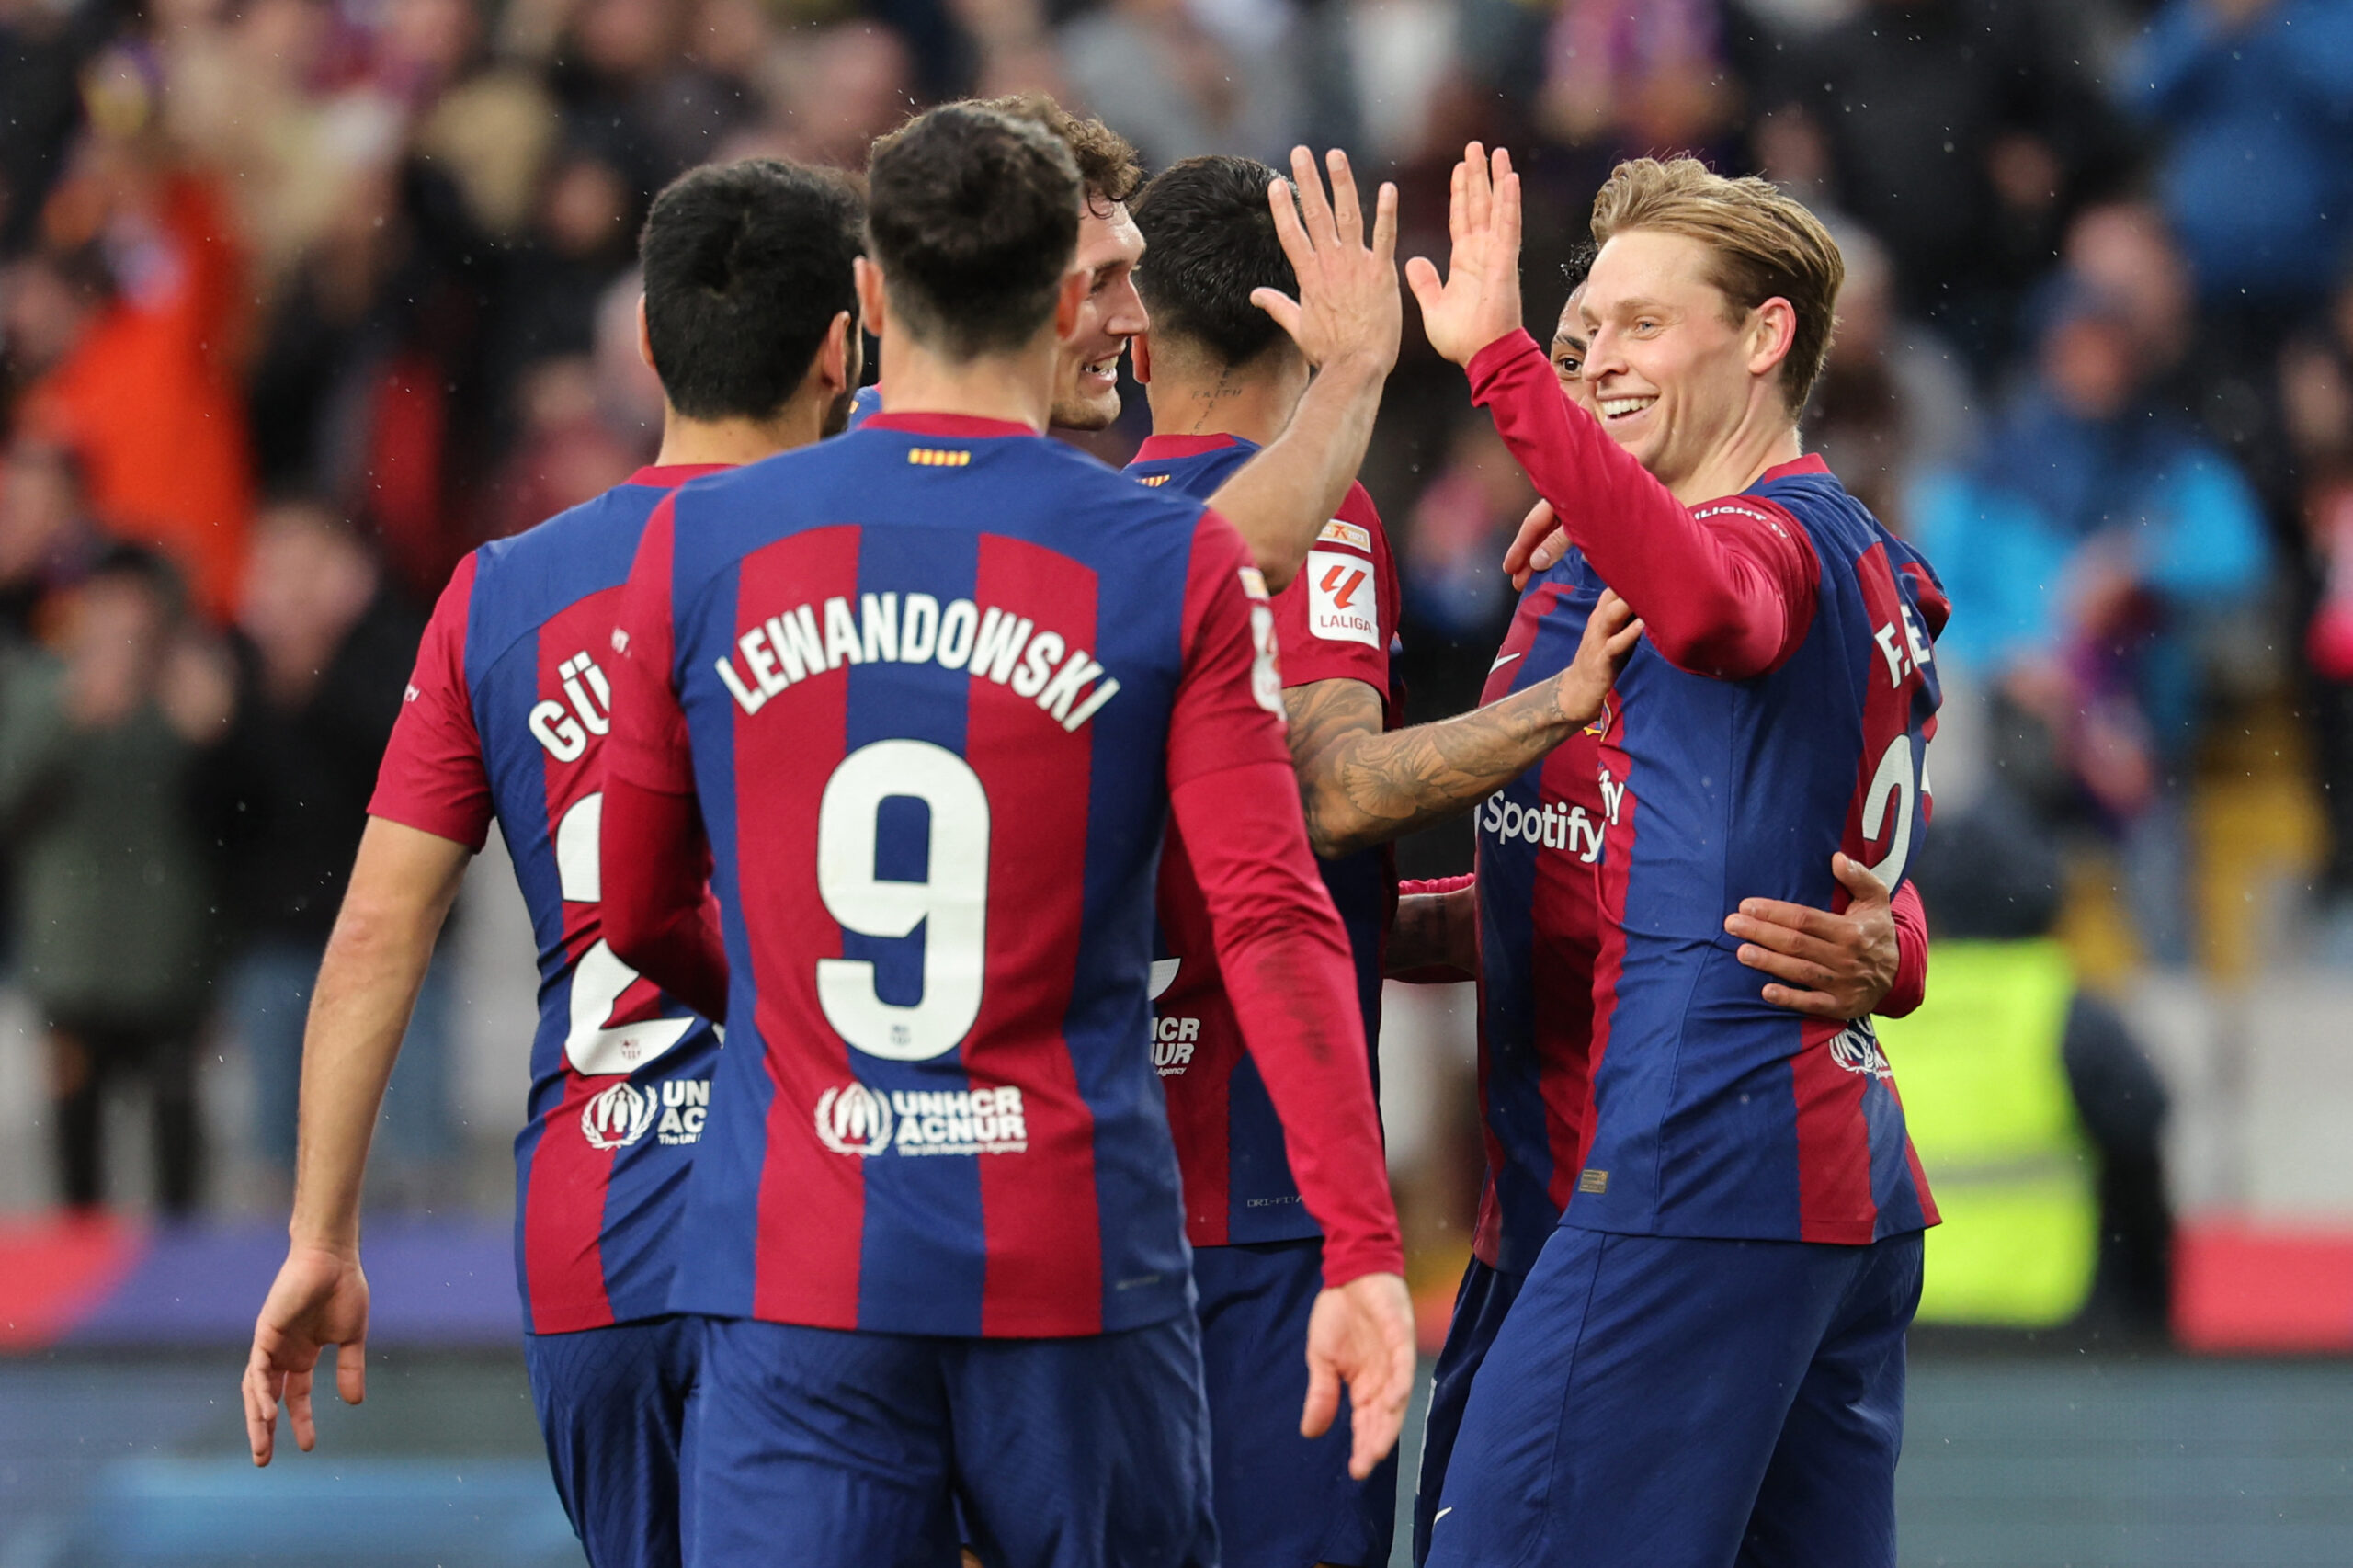 Barcelona's Dutch midfielder #21 Frenkie de Jong (R) celebrates with teammates scoring his team's third goal with teammates during the Spanish league football match between FC Barcelona and Getafe CF at the Estadi Olimpic Lluis Companys in Barcelona on February 24, 2024.